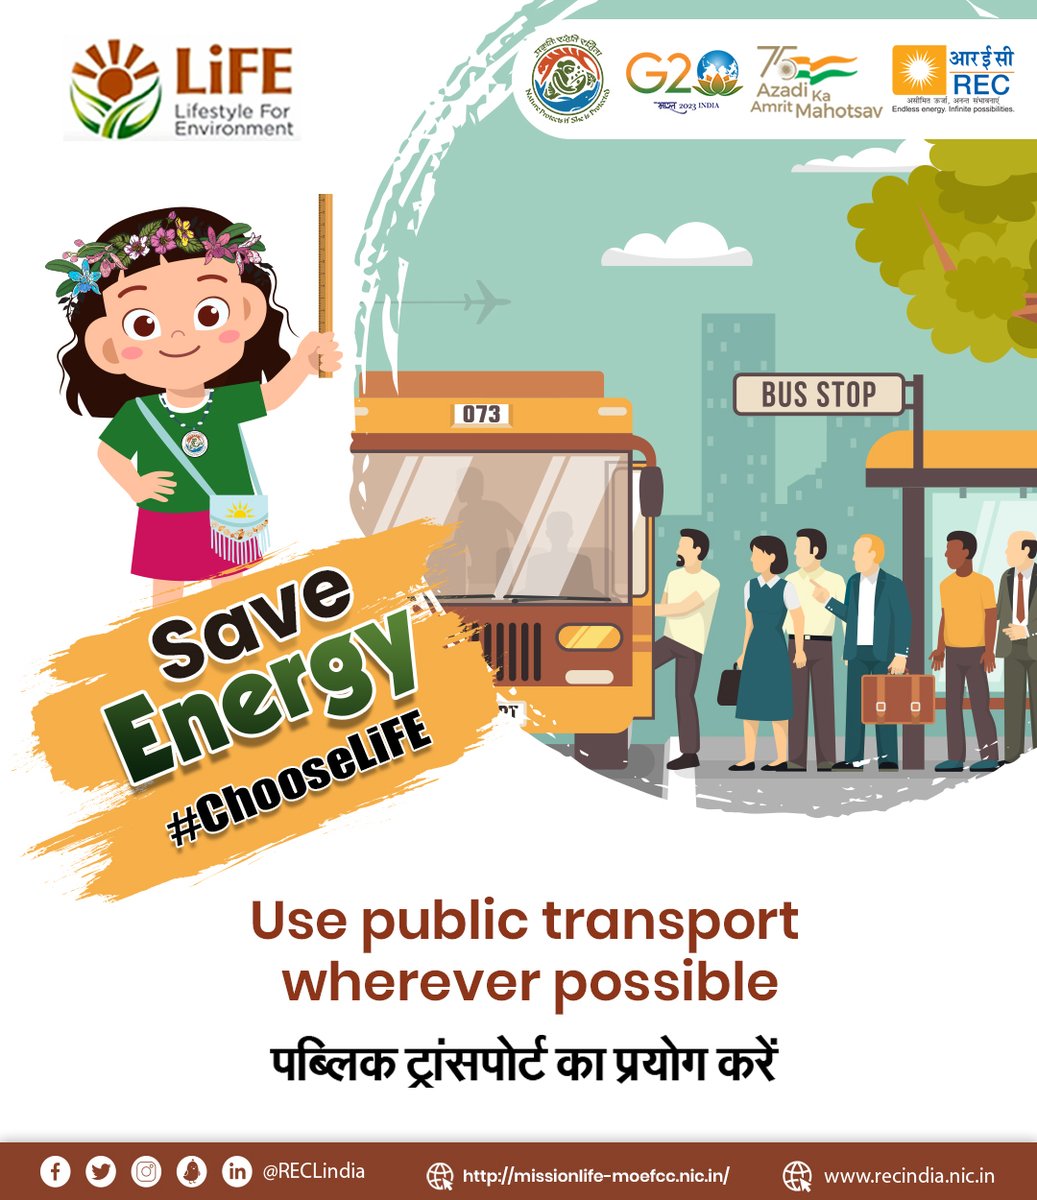 Availing public transport can leave less carbon footprint in the environment. 

#ChooseLiFE #MissionLiFE #ClimateAction4LiFE #JanBhagidari

#RECLimited #REC #RECLindia #SustainableConsumption #GreenEnergy #PowerSector #CSRinitiatives #SustainableGrowth…